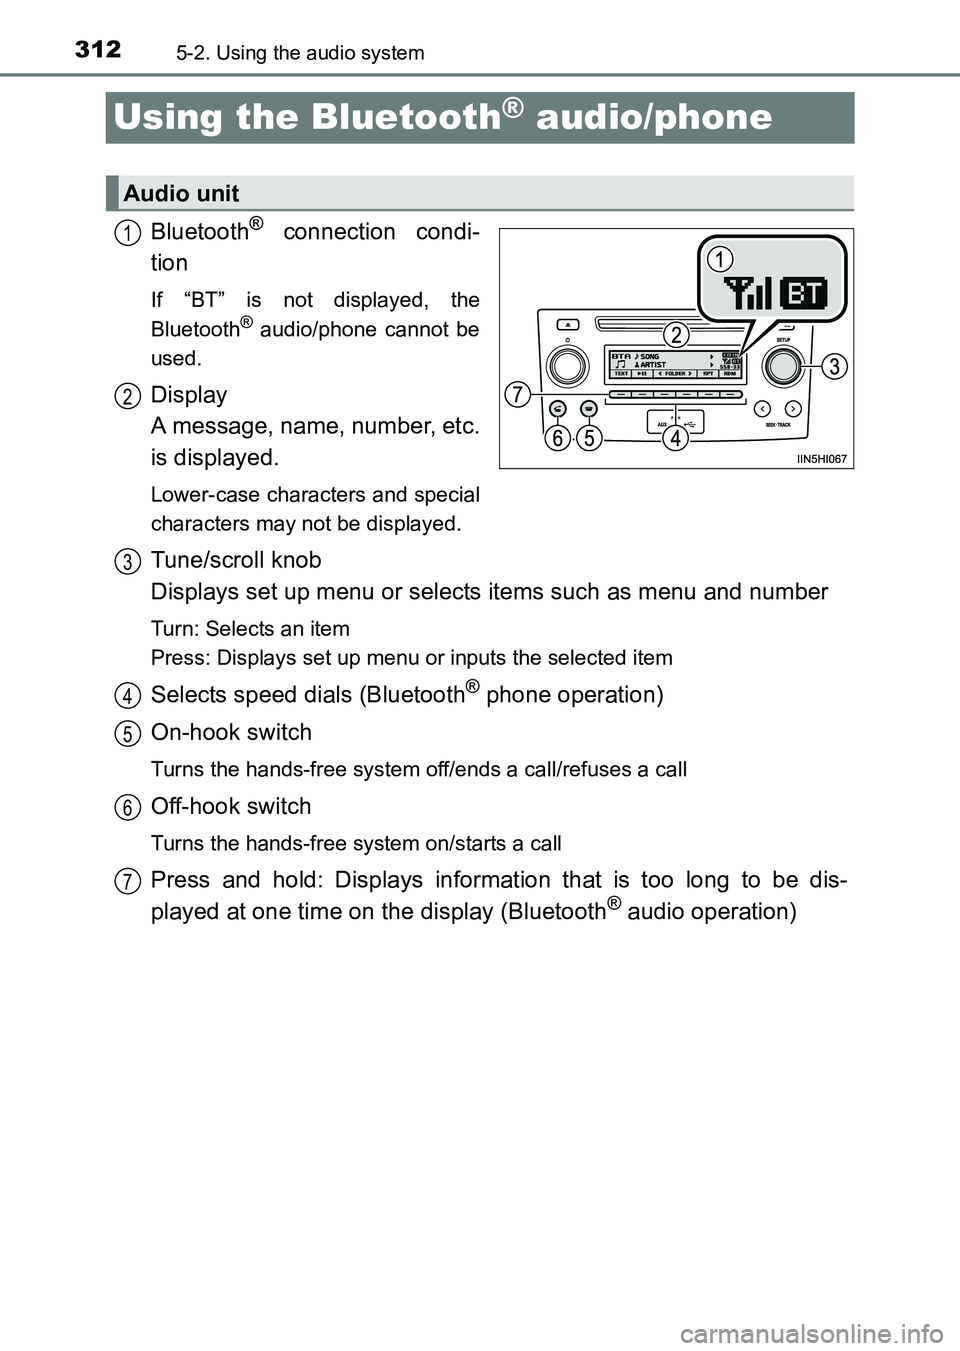 TOYOTA HILUX 2015  Owners Manual (in English) 3125-2. Using the audio system
HILUX_OM_OM0K219E_(EE)
Using the Bluetooth® audio/phone
Bluetooth® connection condi-
tion
If “BT” is not displayed, the
Bluetooth® audio/phone cannot be
used.
Dis